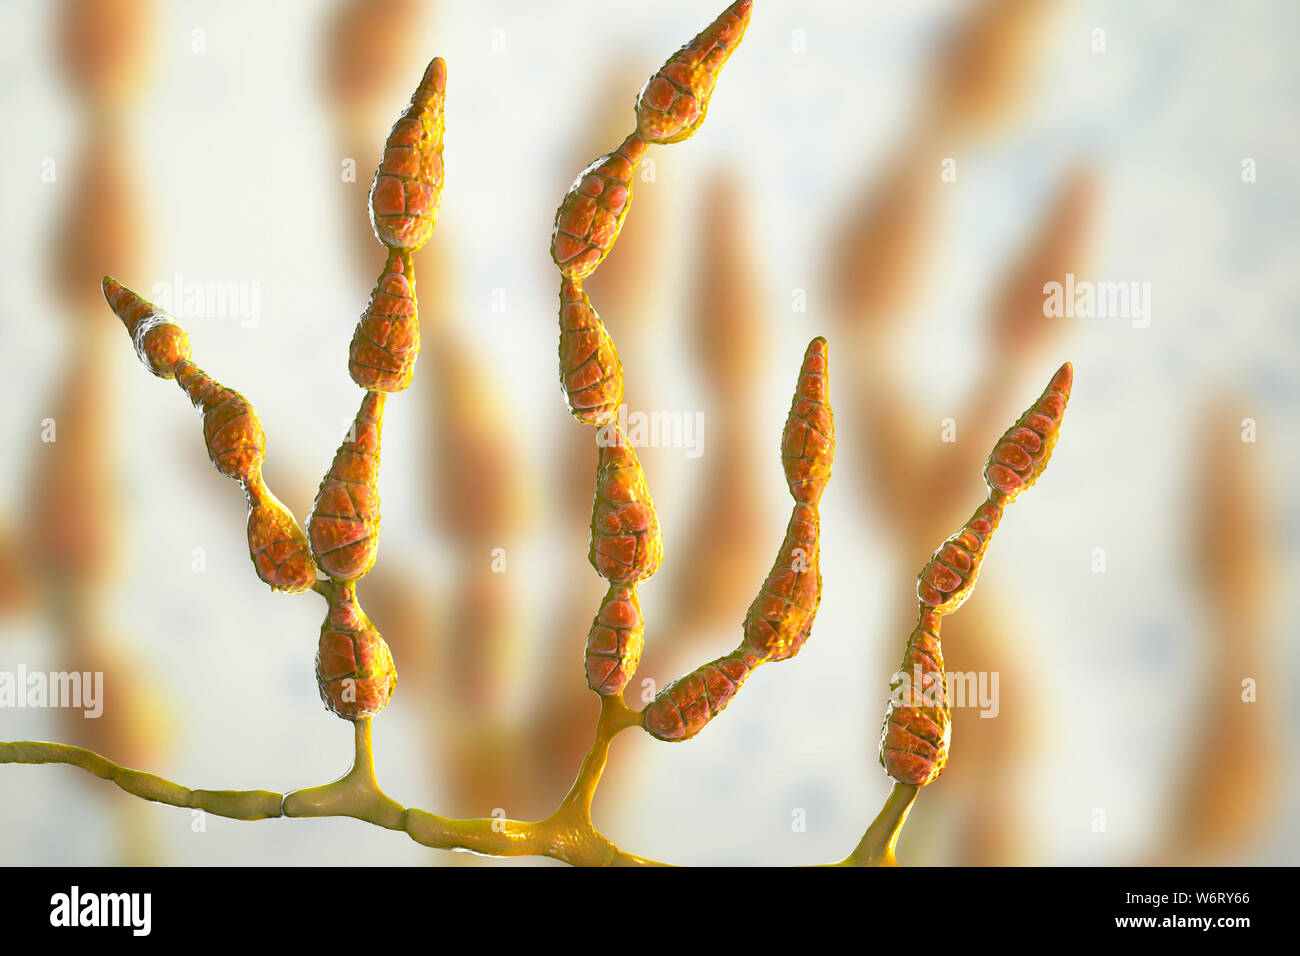 Filamentous allergenic fungus Alternaria alternata, computer illustration. Alternaria is a dematiaceous (phaeoid) fungus commonly isolated from plants Stock Photo